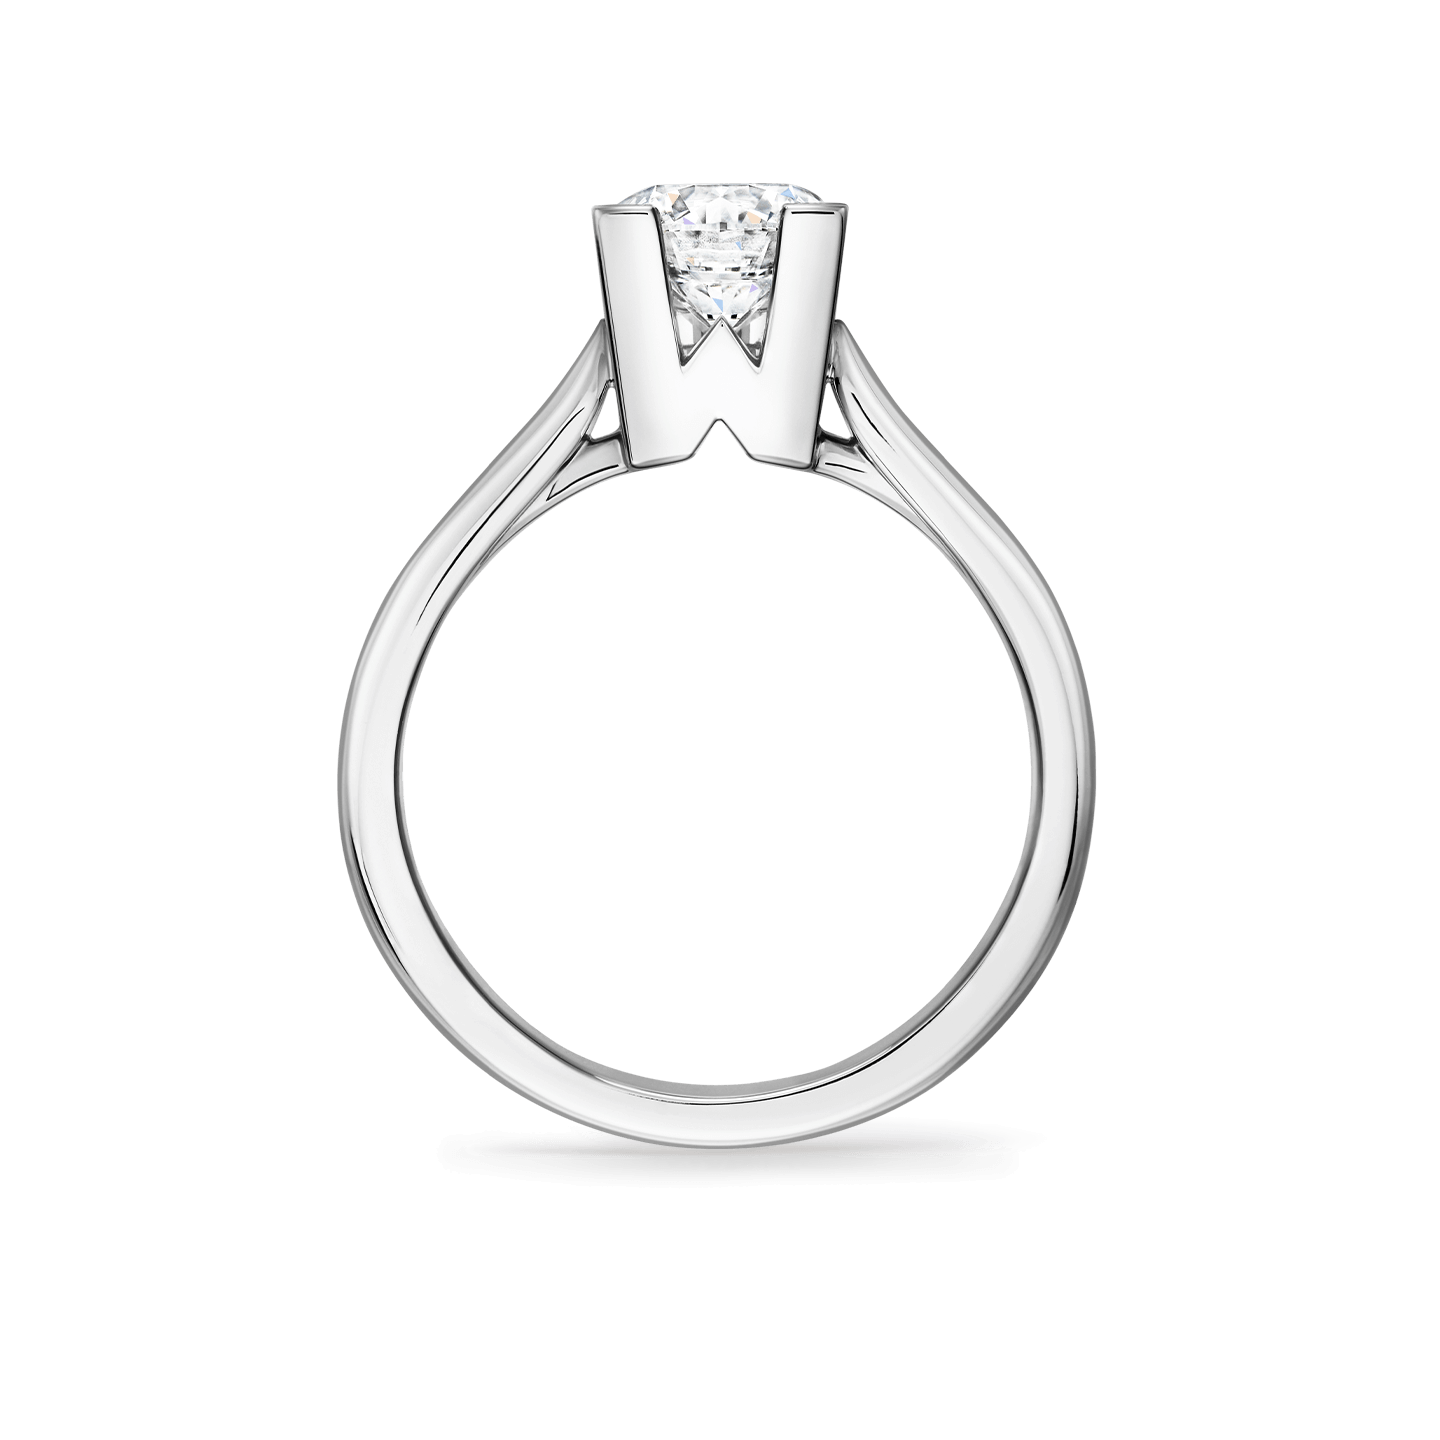 Alternative side view of the HW Logo Round Brilliant Diamond Engagement Ring